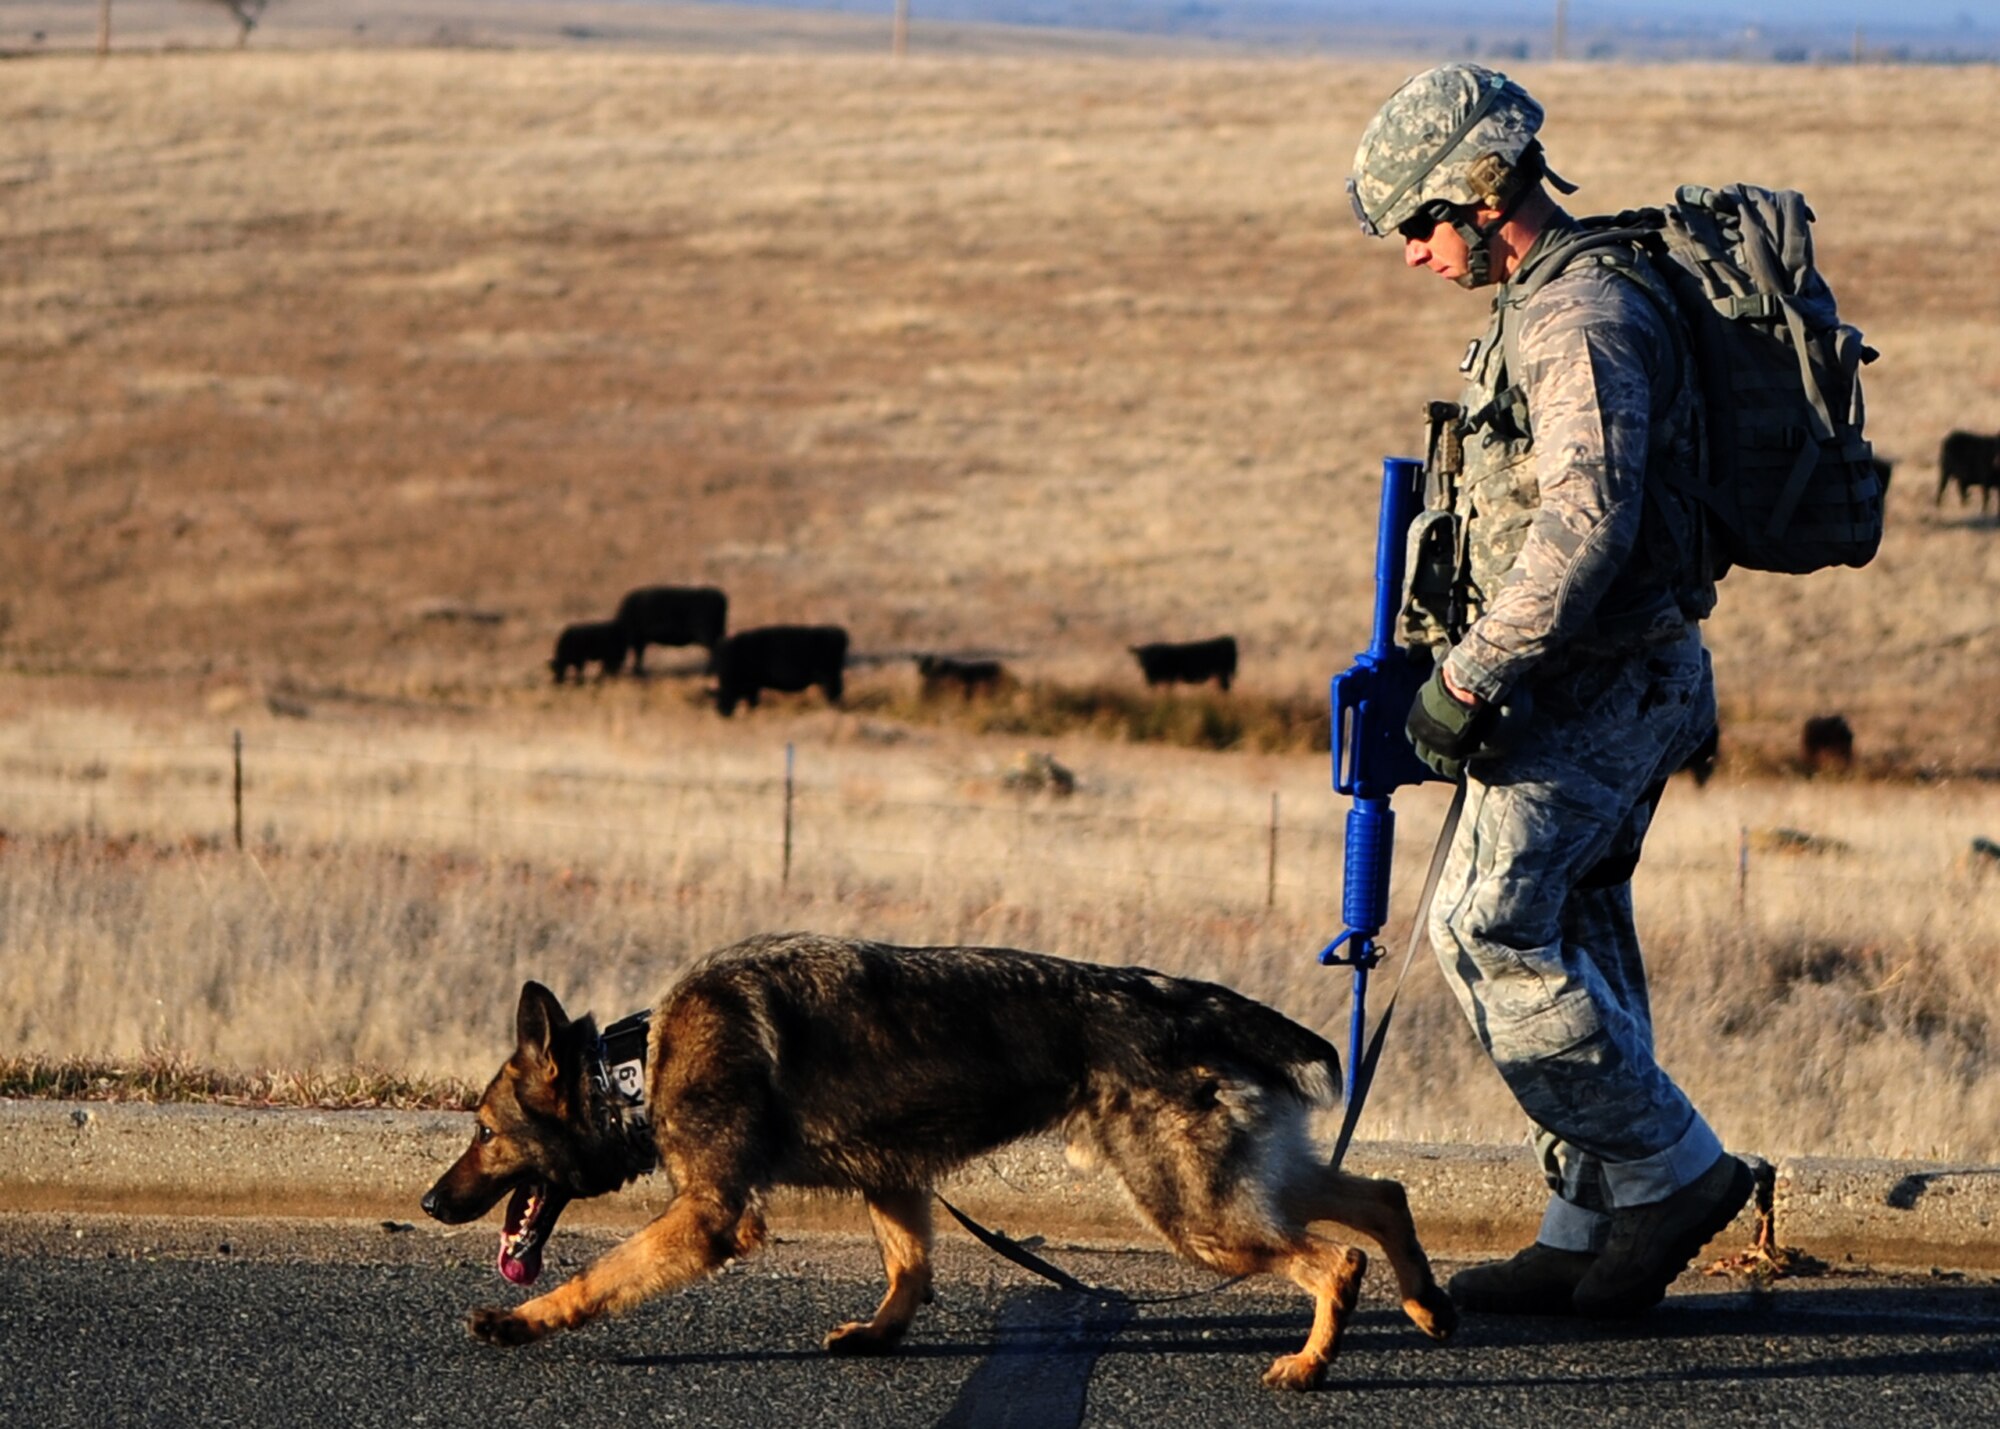 Staff Sgt. Bryan Bowermaster, 9th Security Forces Squadron military working dog handler, walks with his dog, Edy, during a ruck march on Beale AFB Jan. 9, 2012. Each Airman dons a full combat ensemble, a simulated weapon and a backpack weighing upwards of 70 pounds. (U.S Air Force photo by Senior Airman Shawn Nickel/Released)